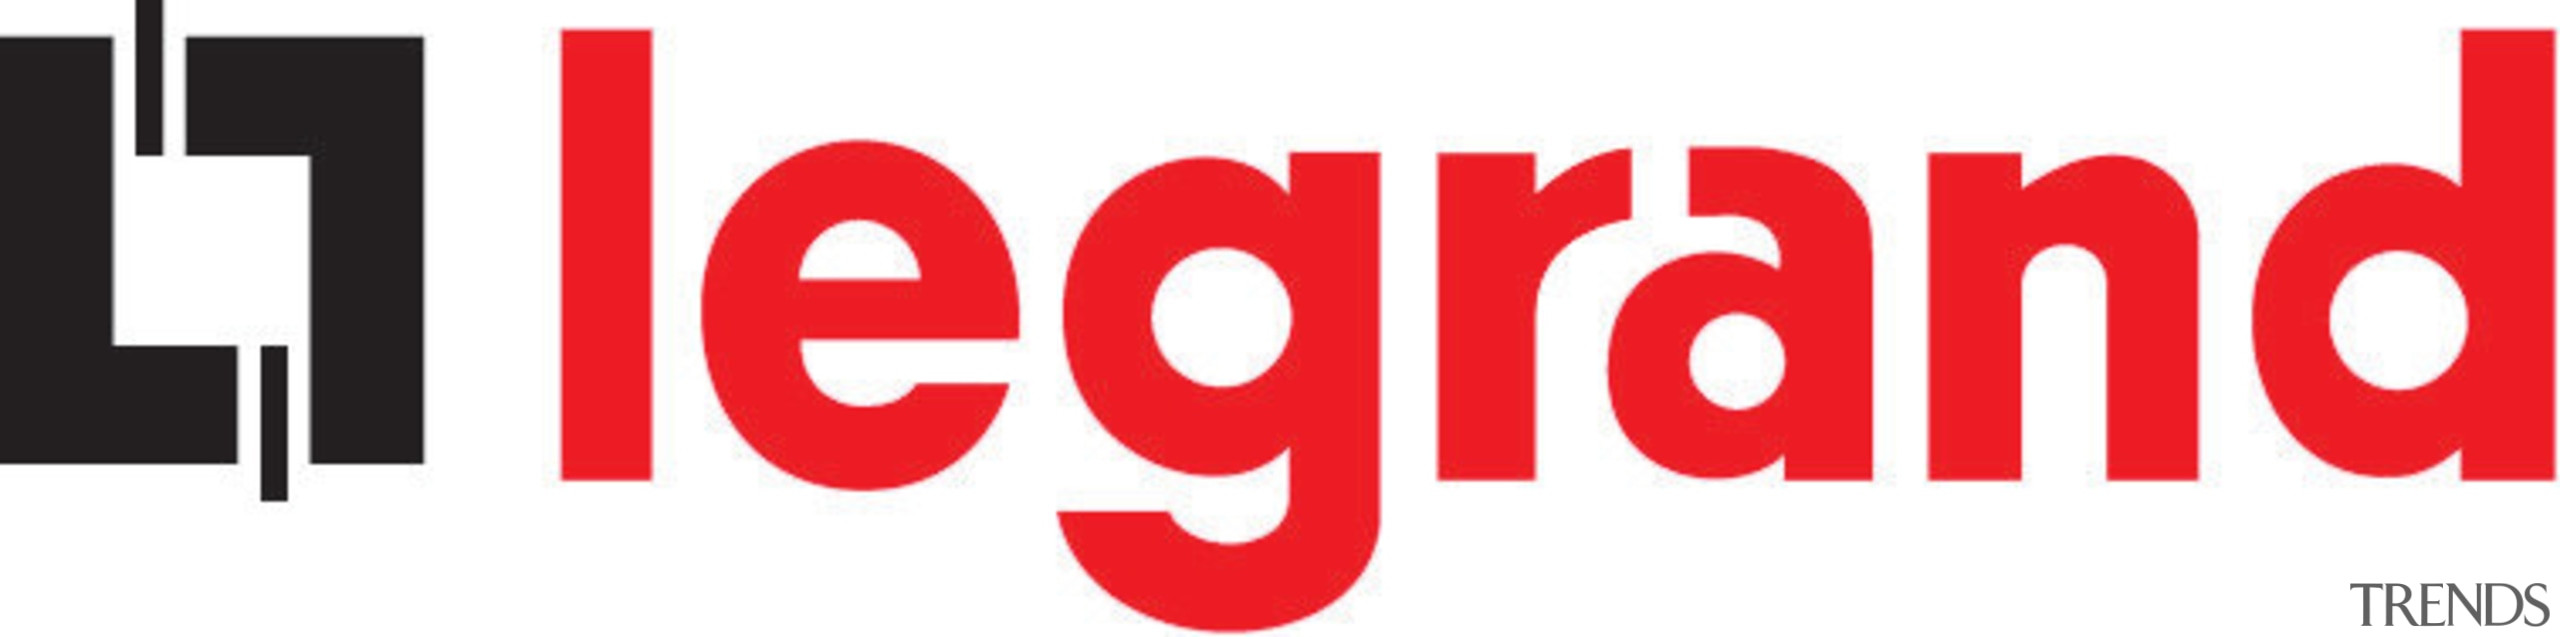 View of Legrand logo. - View of Legrand area, brand, font, graphics, logo, product, product design, red, text, white, red